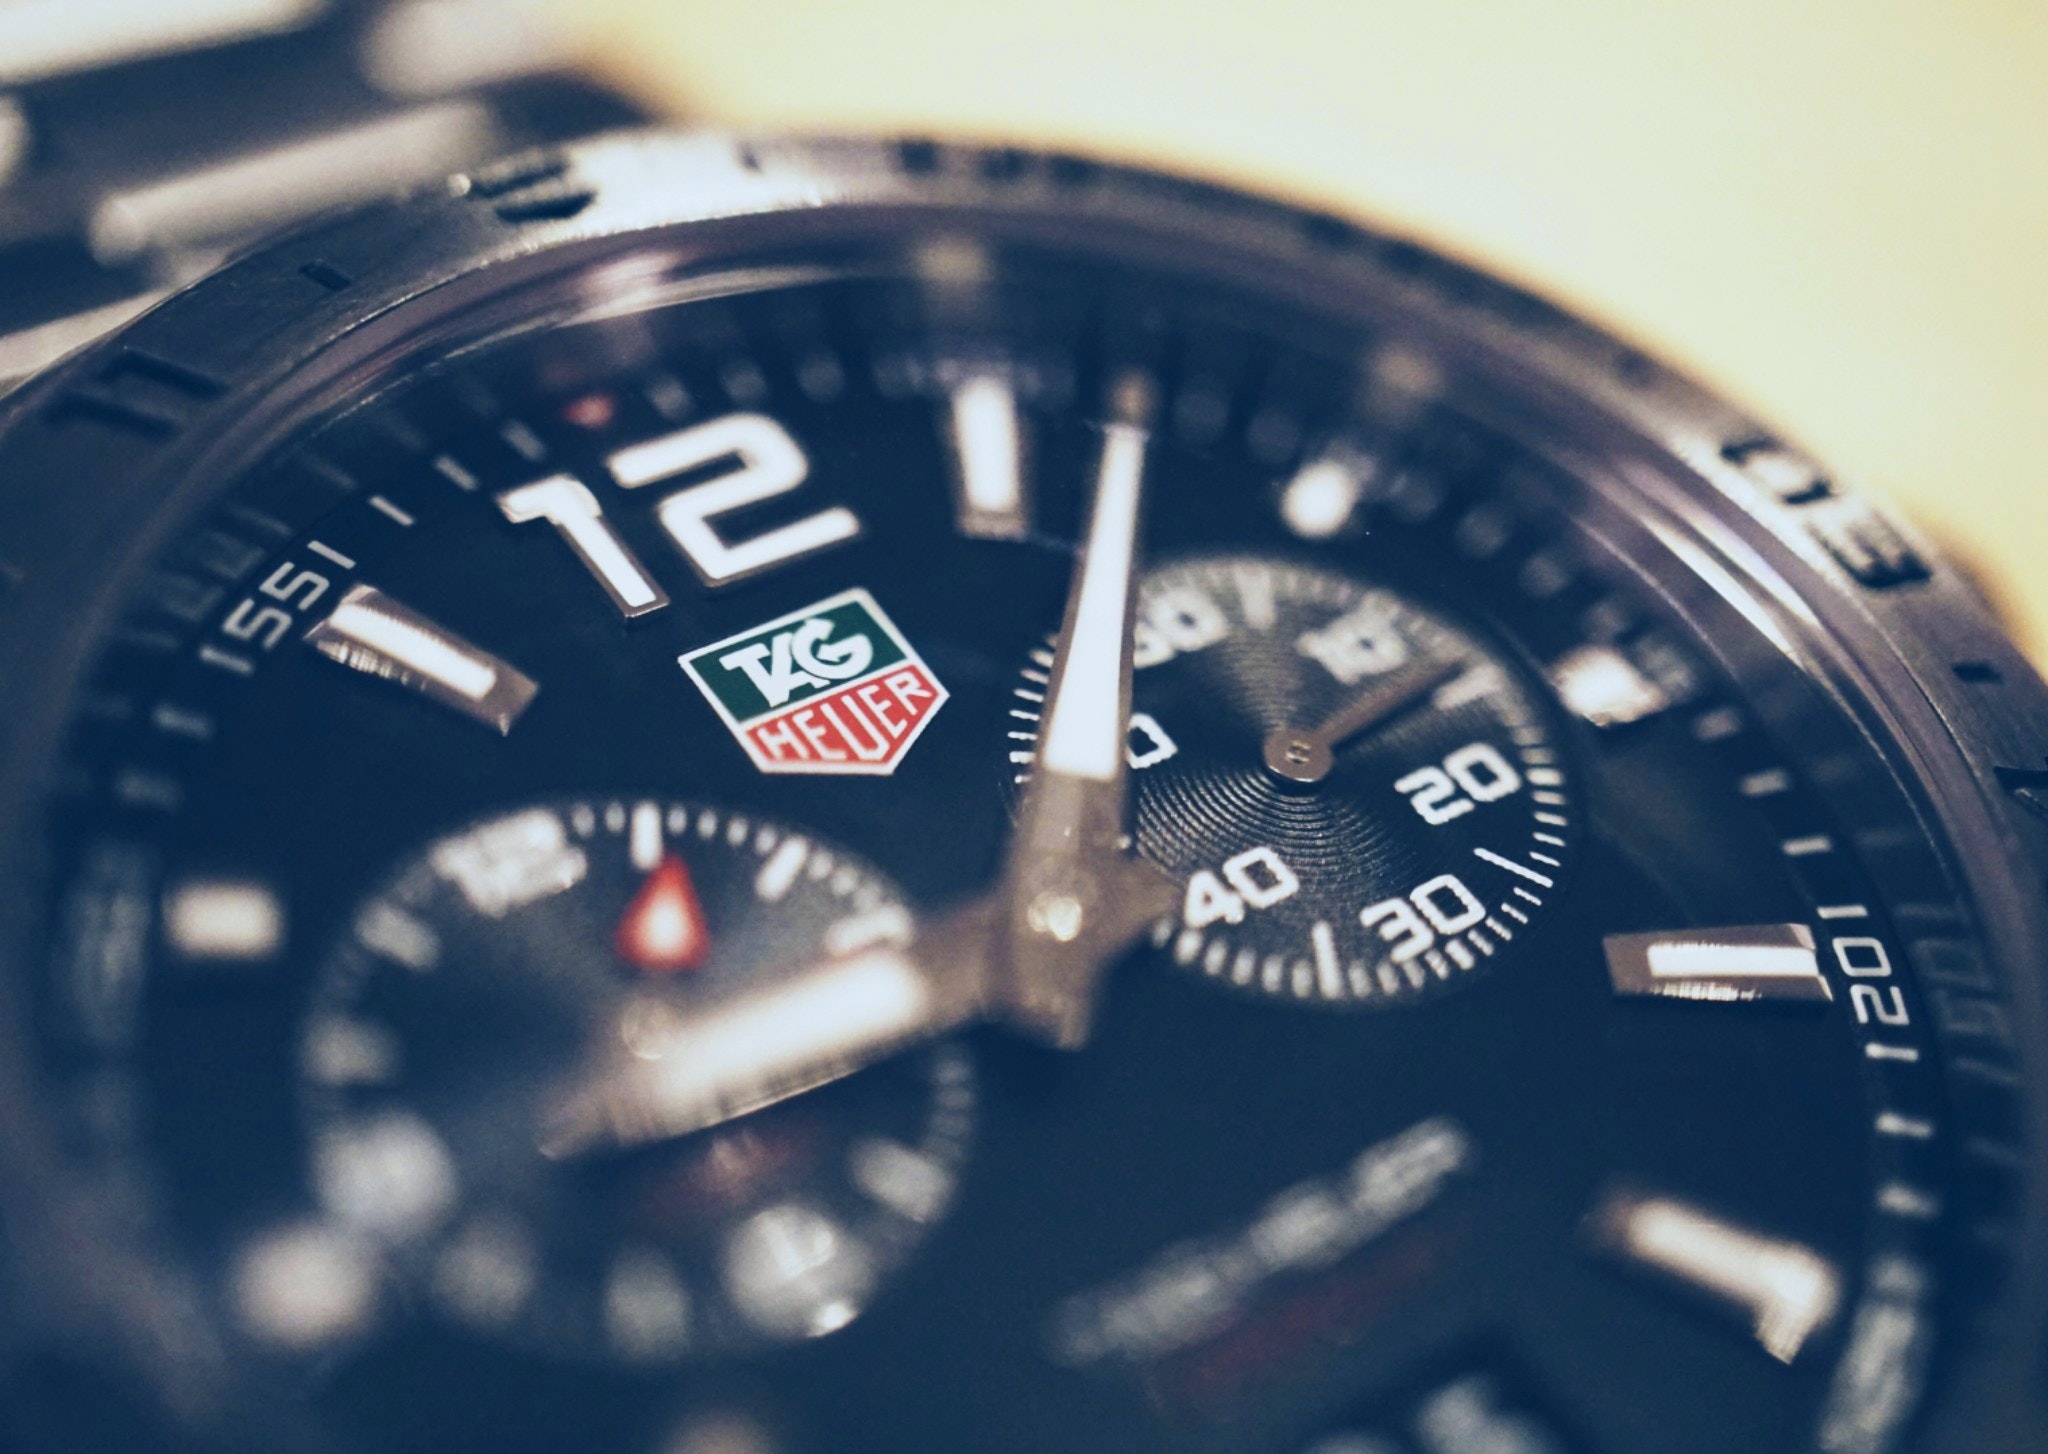 TAG Heuer: The Swiss Luxury Timepiece Design House